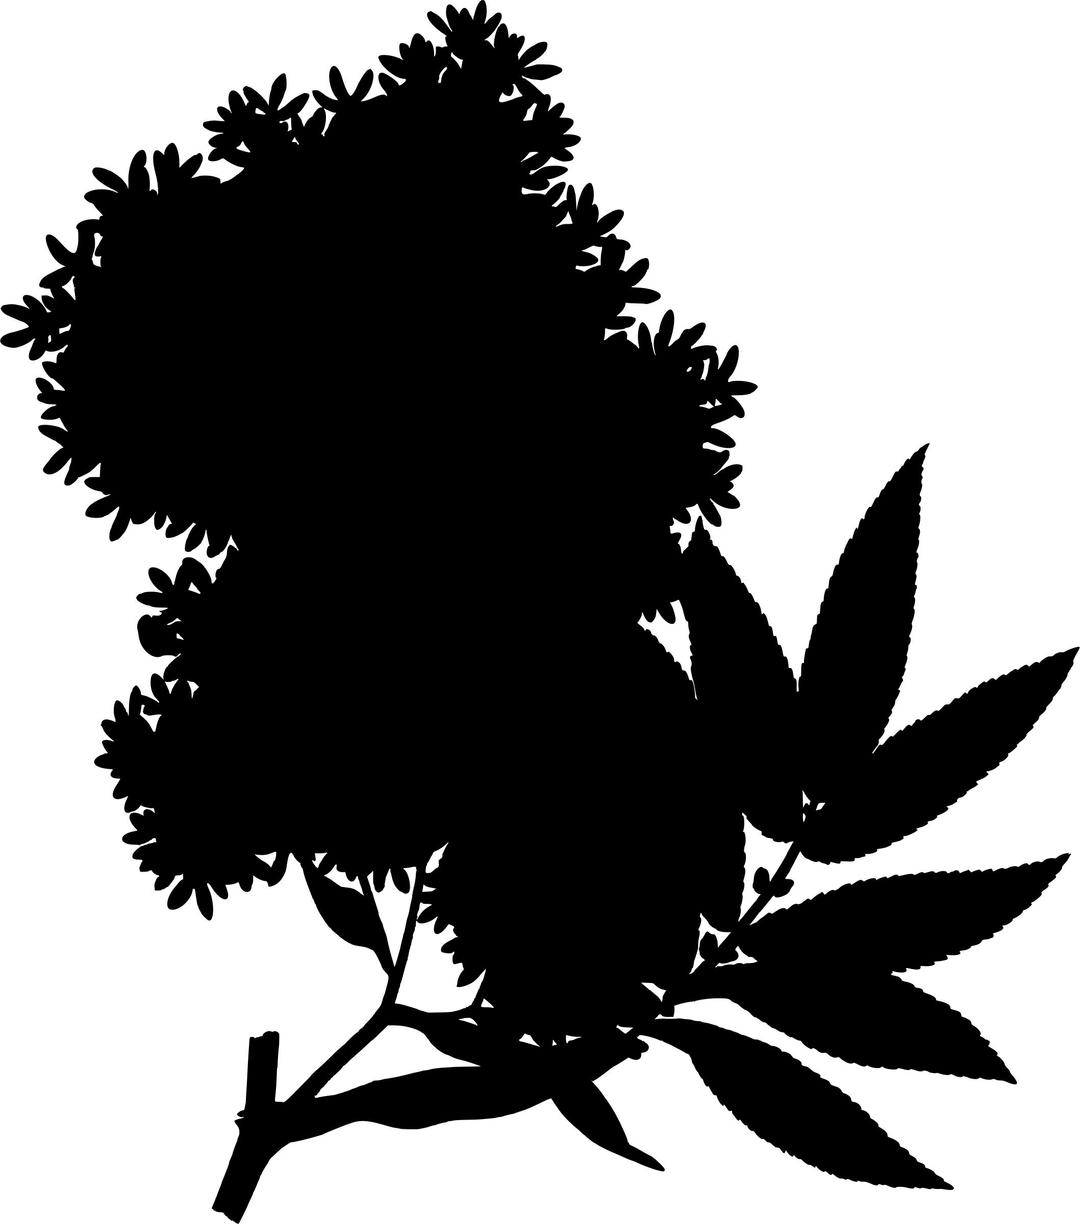 African redwood (silhouette) png transparent